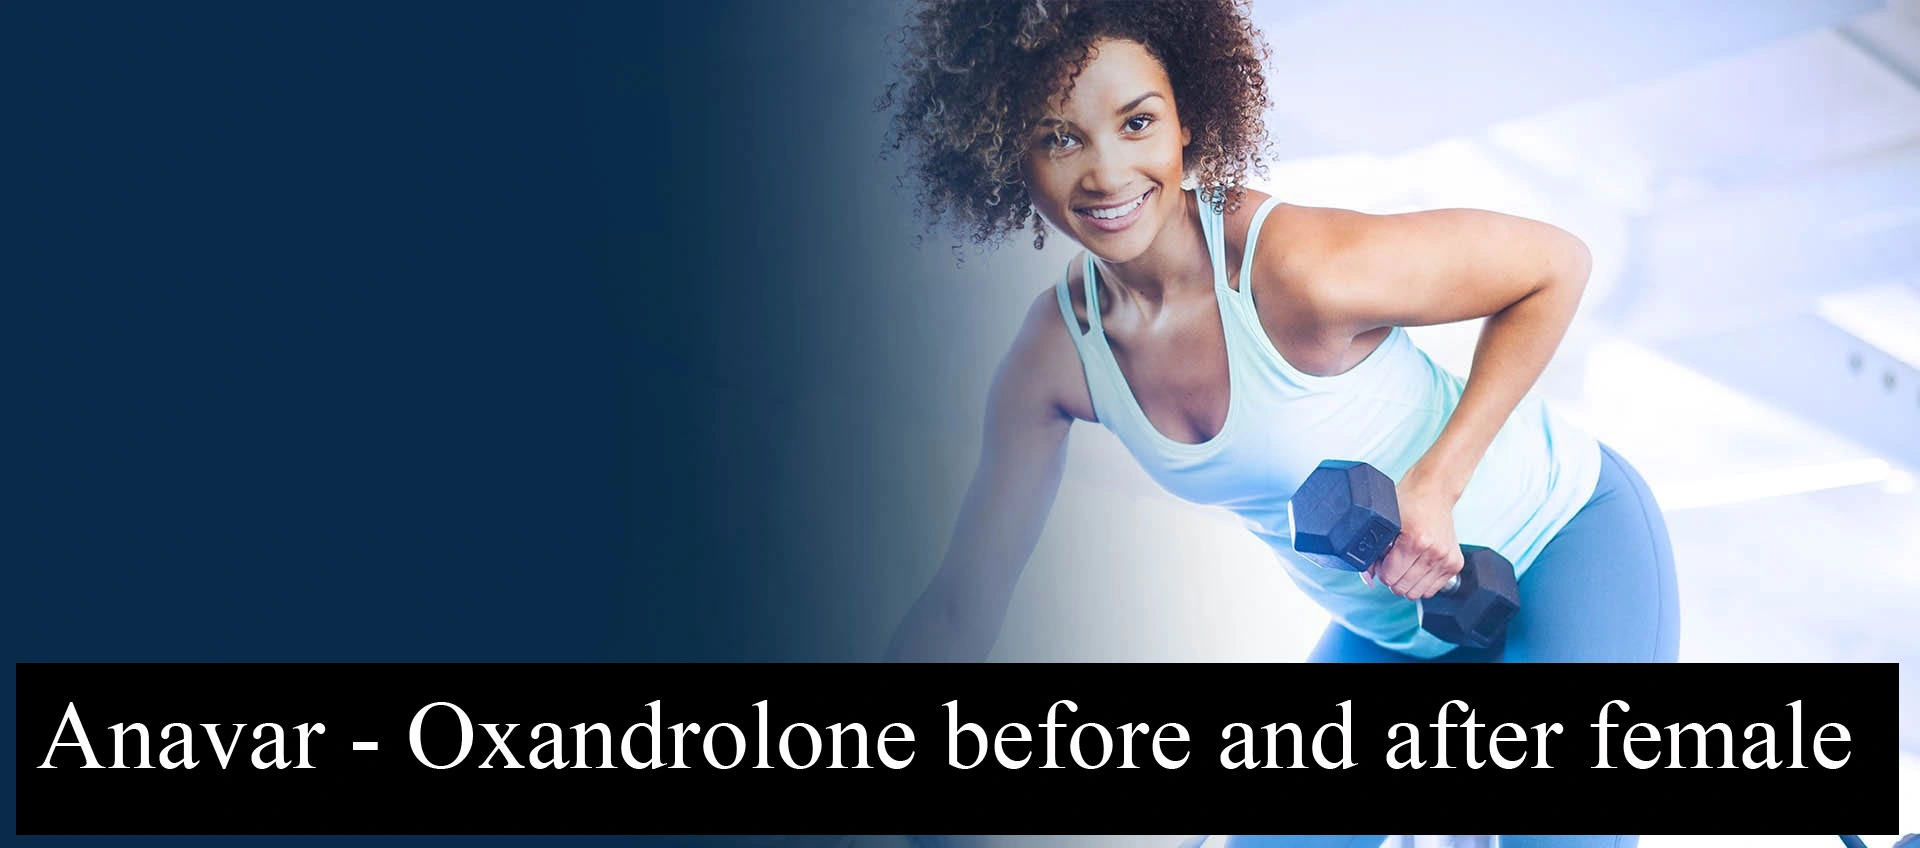 Anavar – Oxandrolone Before and After Female From Being Overweight to Increasing Self-Esteem and Self-Confidence